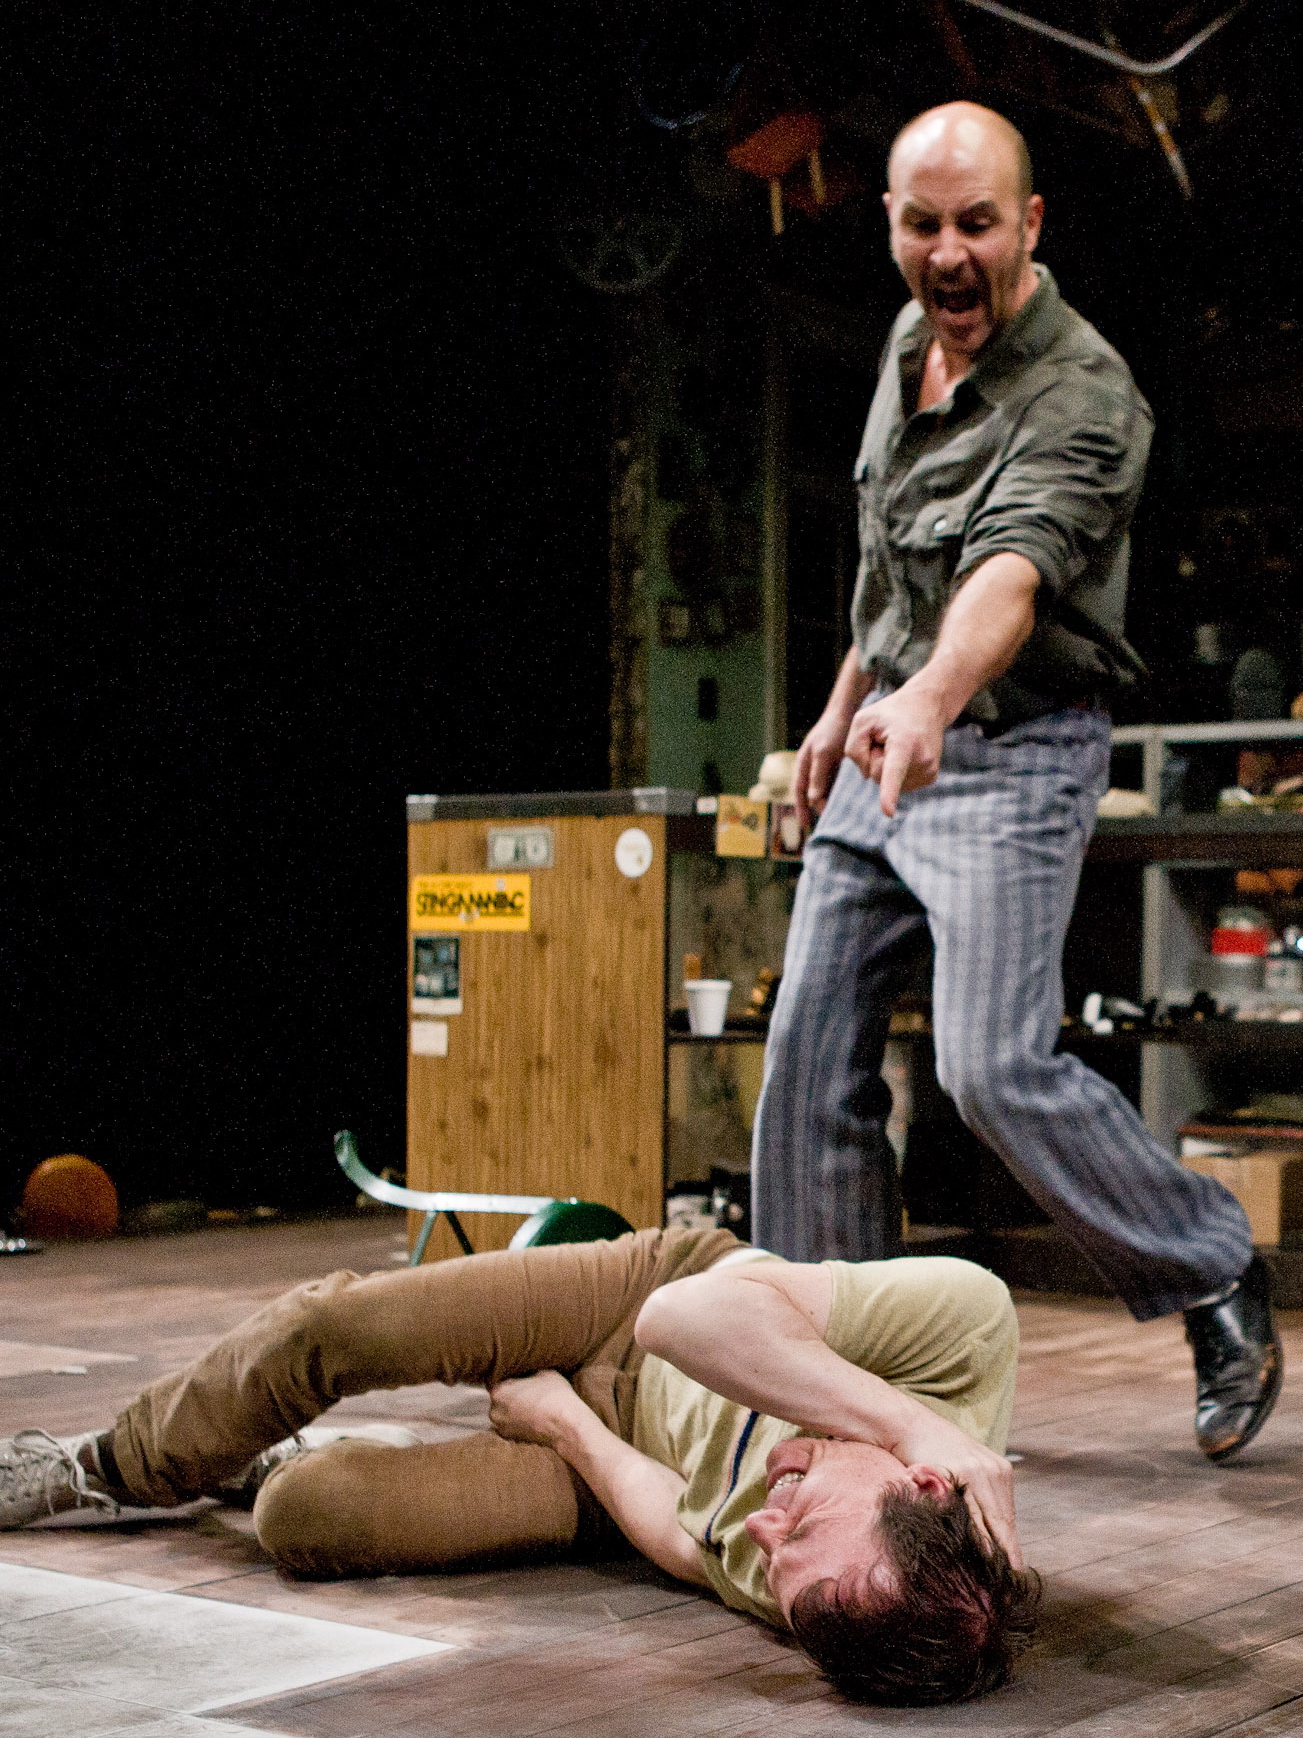 Jordan Lage as Teach w/ Rusty Ross as Bobby in David Mamet's AMERICAN BUFFALO at Baltimore's CenterStage Theater (2011).